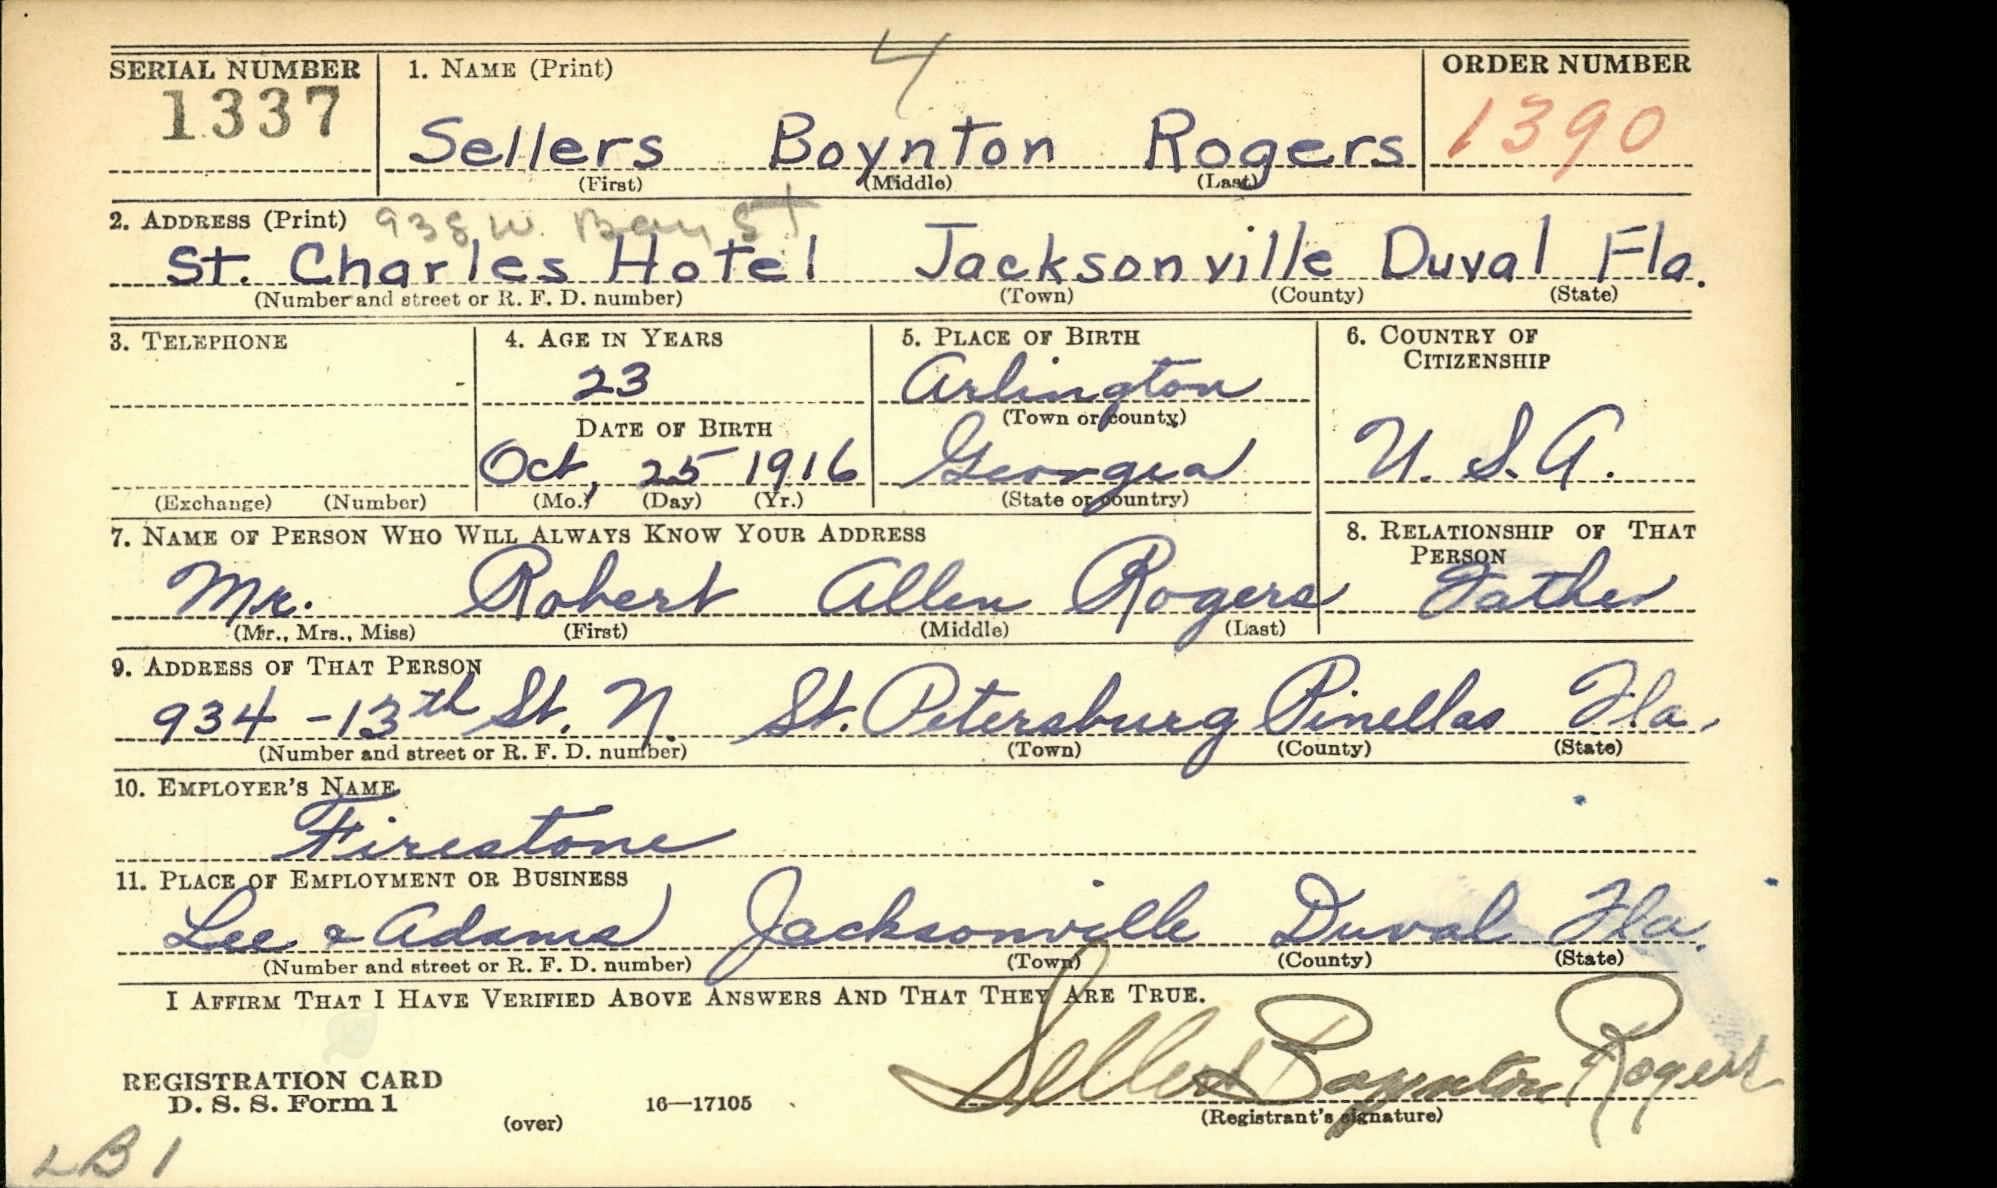 WWII Draft Registration Card for Sellers B. Rogers